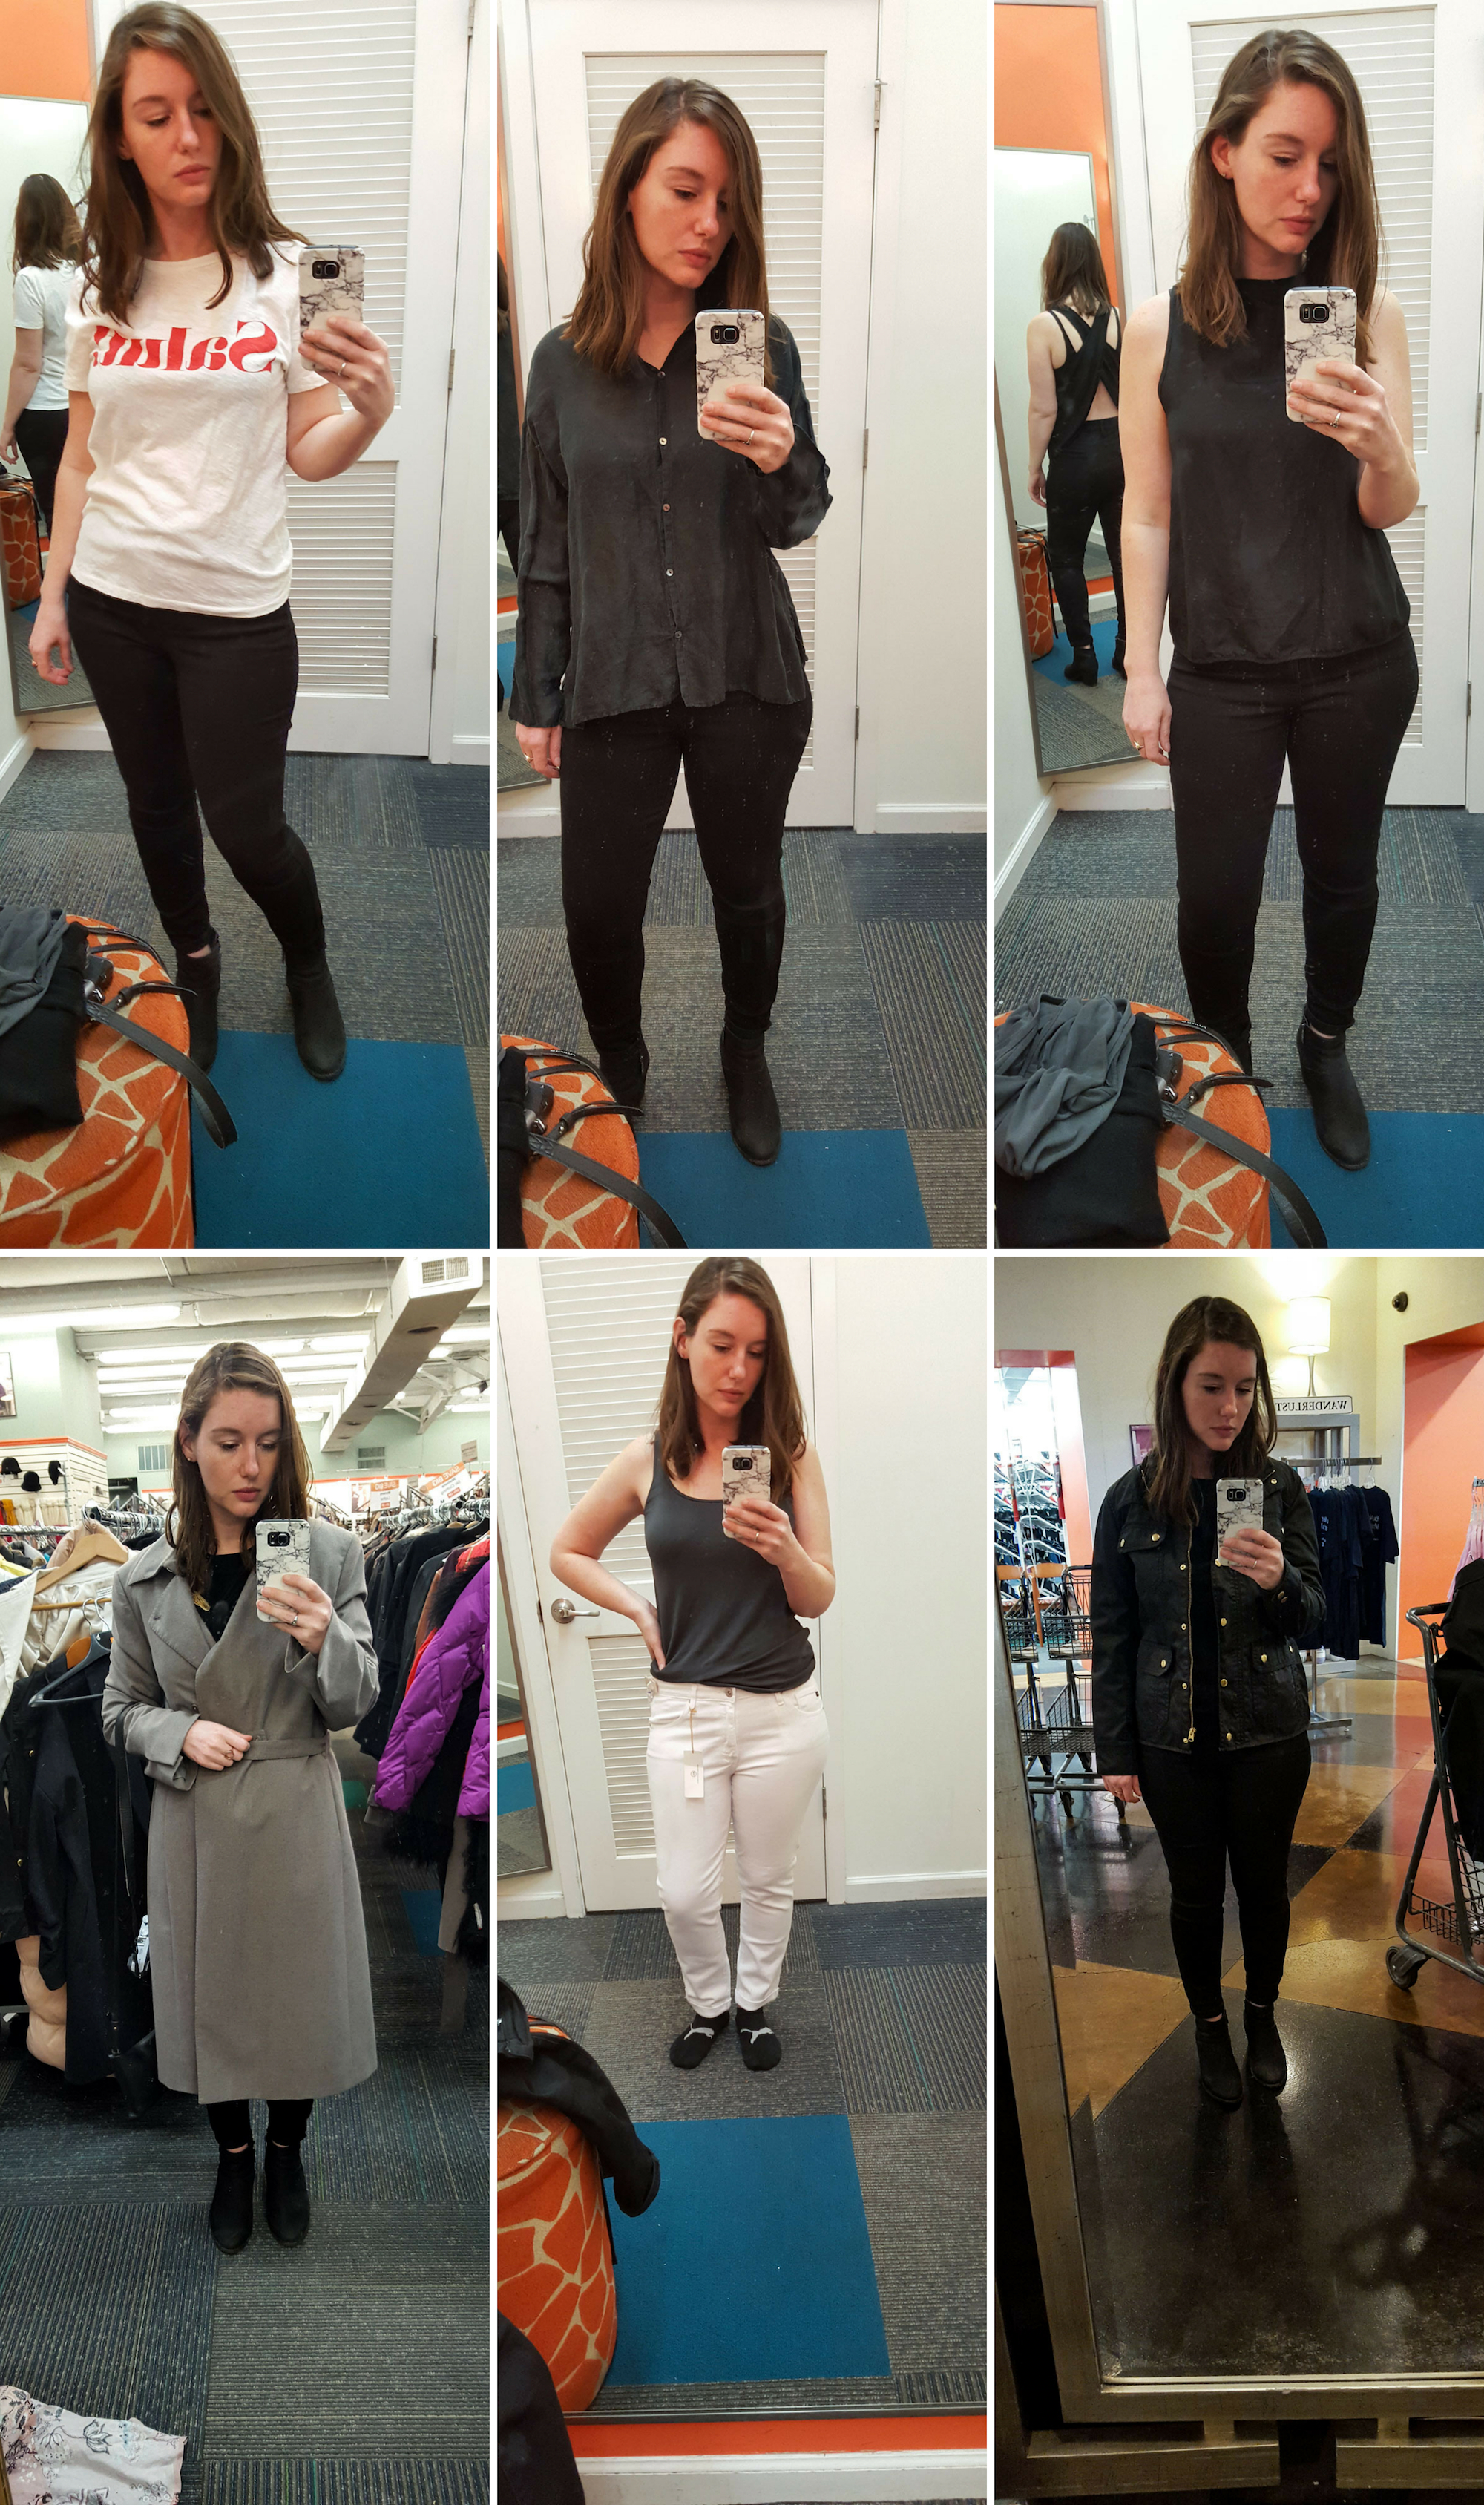 Photo collage: garments tried on including t-shirts, tanks, and coats